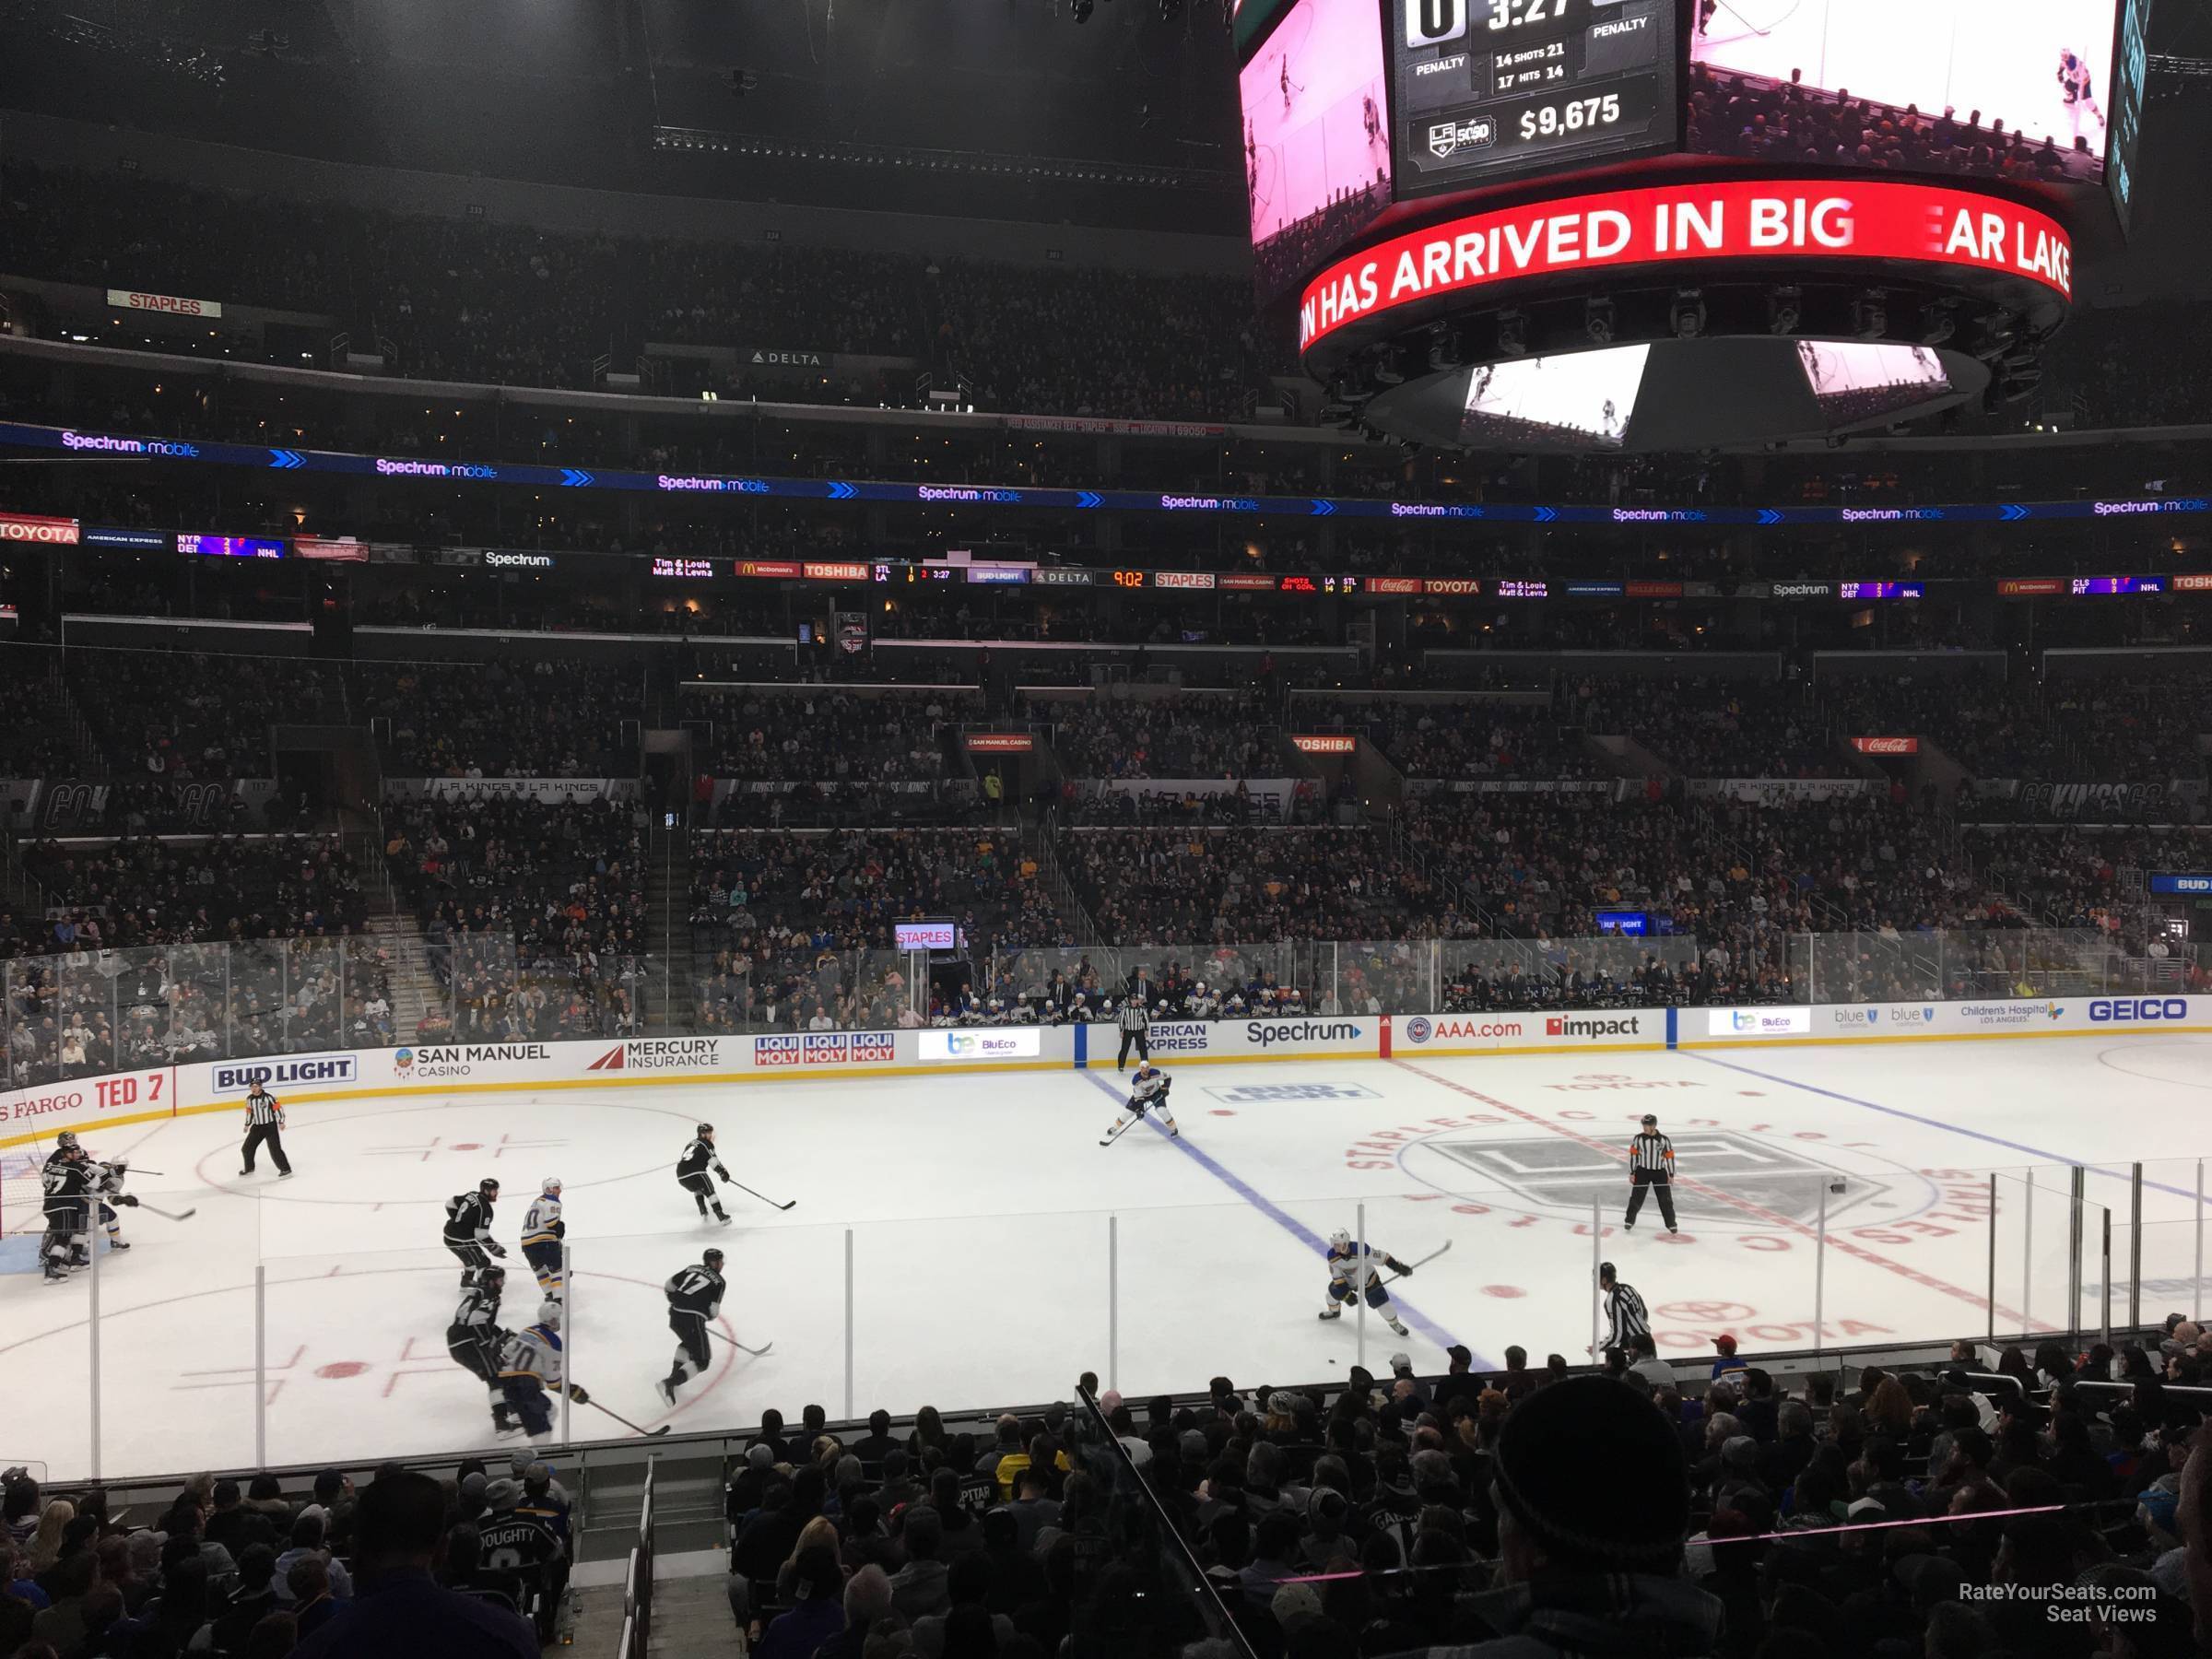 section 112, row 20 seat view  for hockey - crypto.com arena